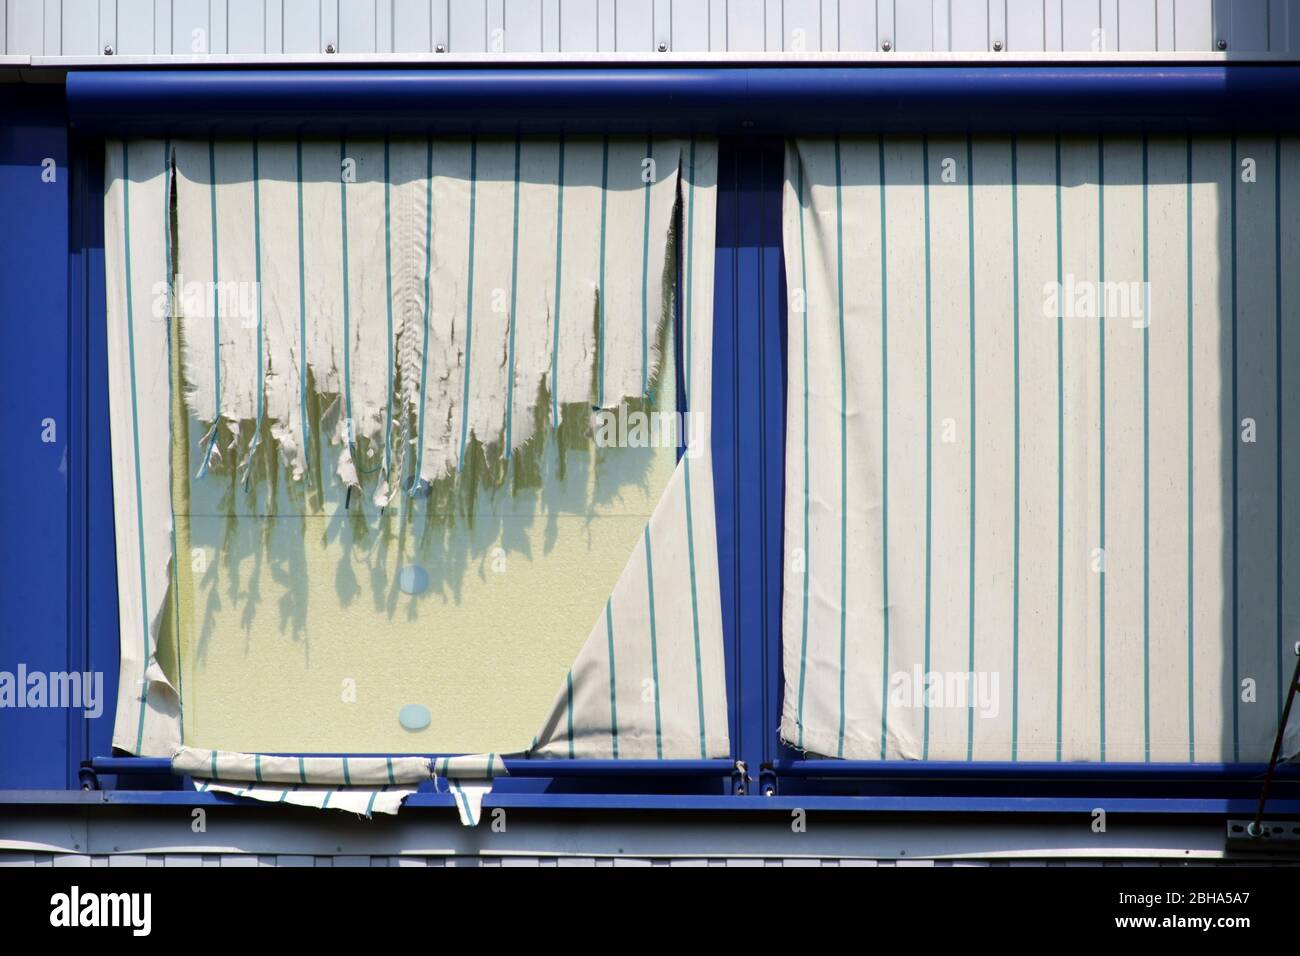 Torn fabric drapes on the windows of an upper floor of a commercial building. Stock Photo